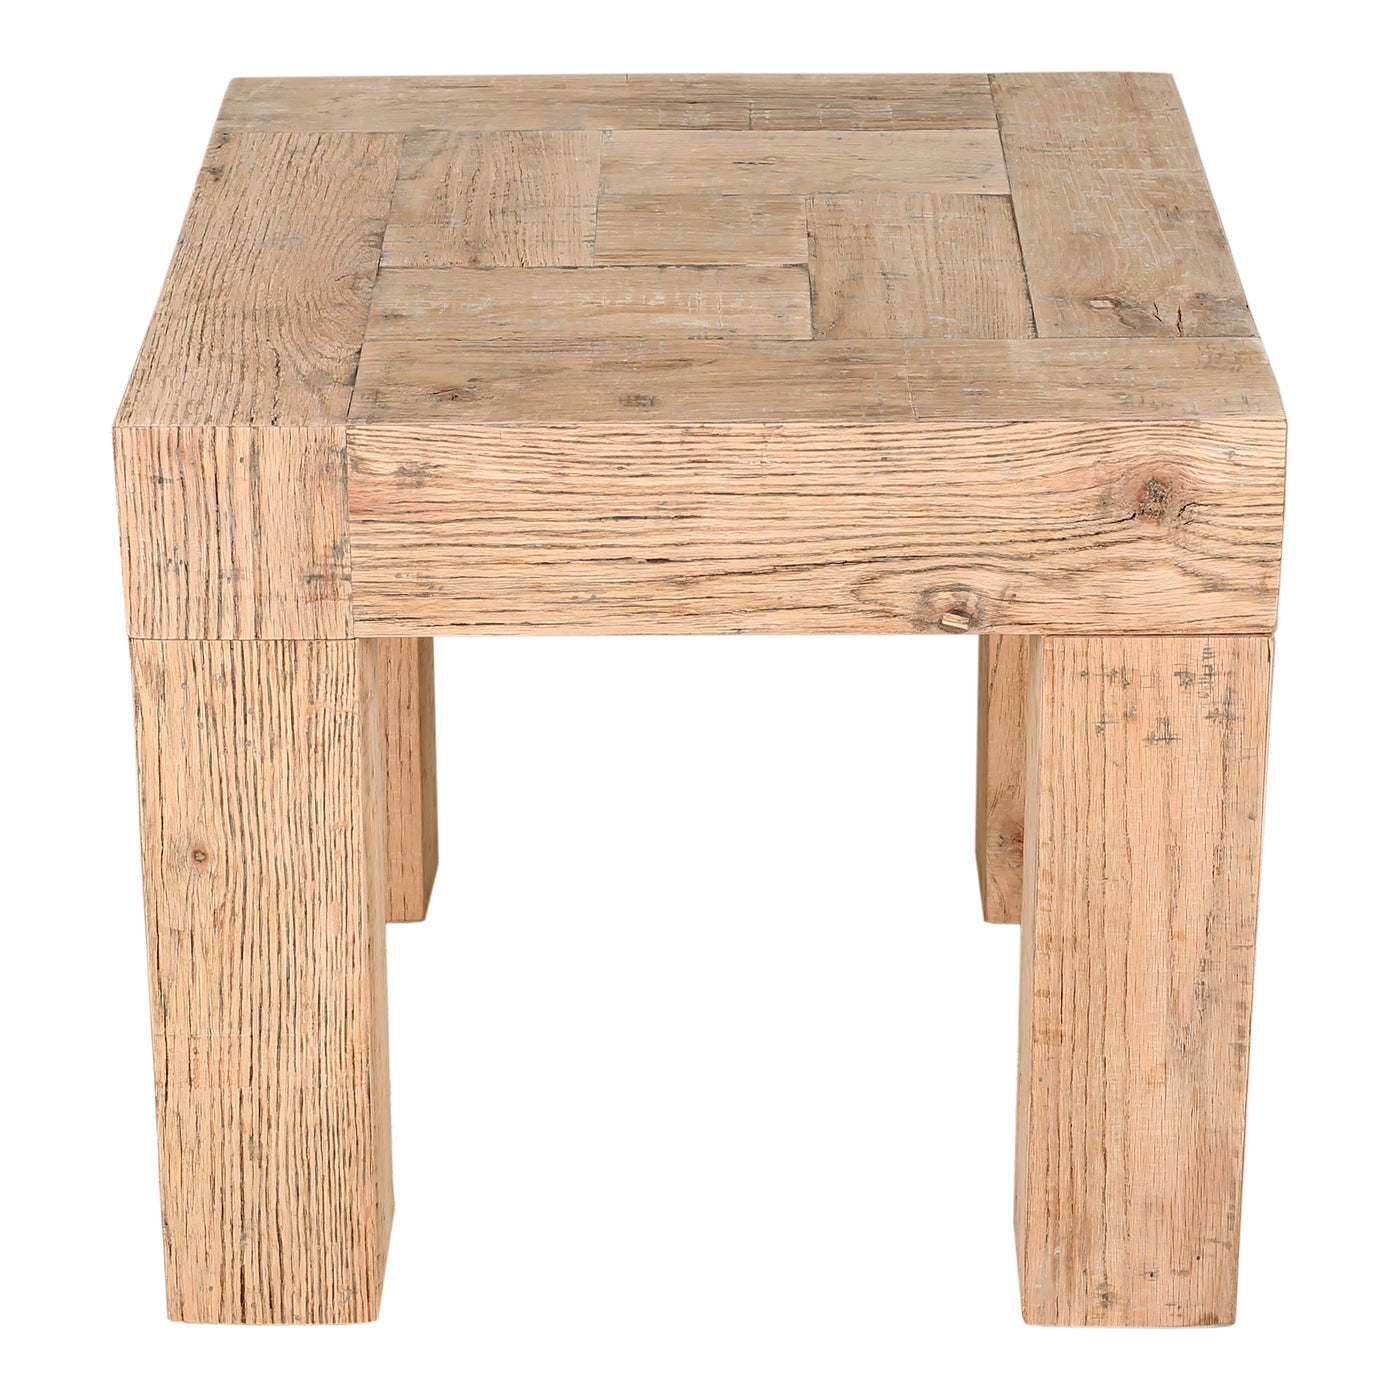 For all the organic energy, choose Evander. Formed from solid reclaimed oak, the Evander side table features wild grains a...